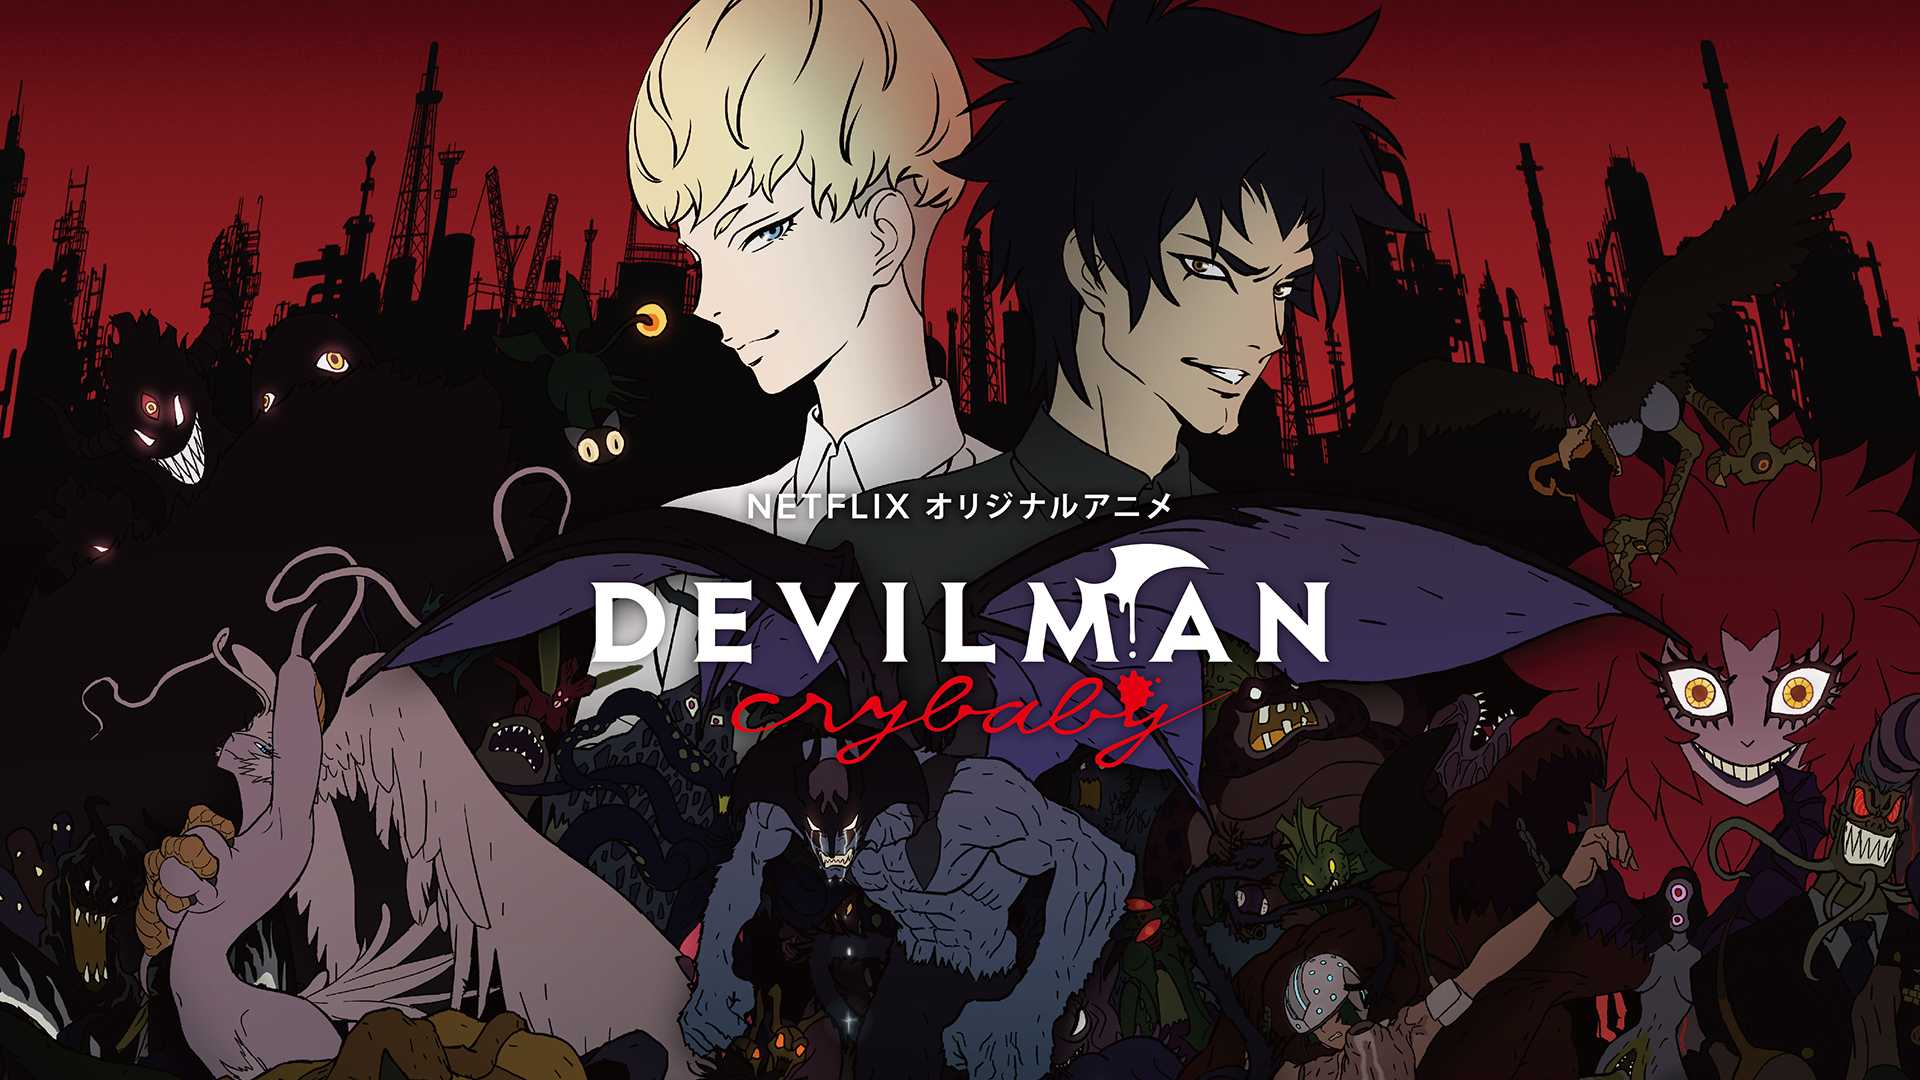 Devilman Crybaby - Anime Where MC is Betrayed And Becomes OP